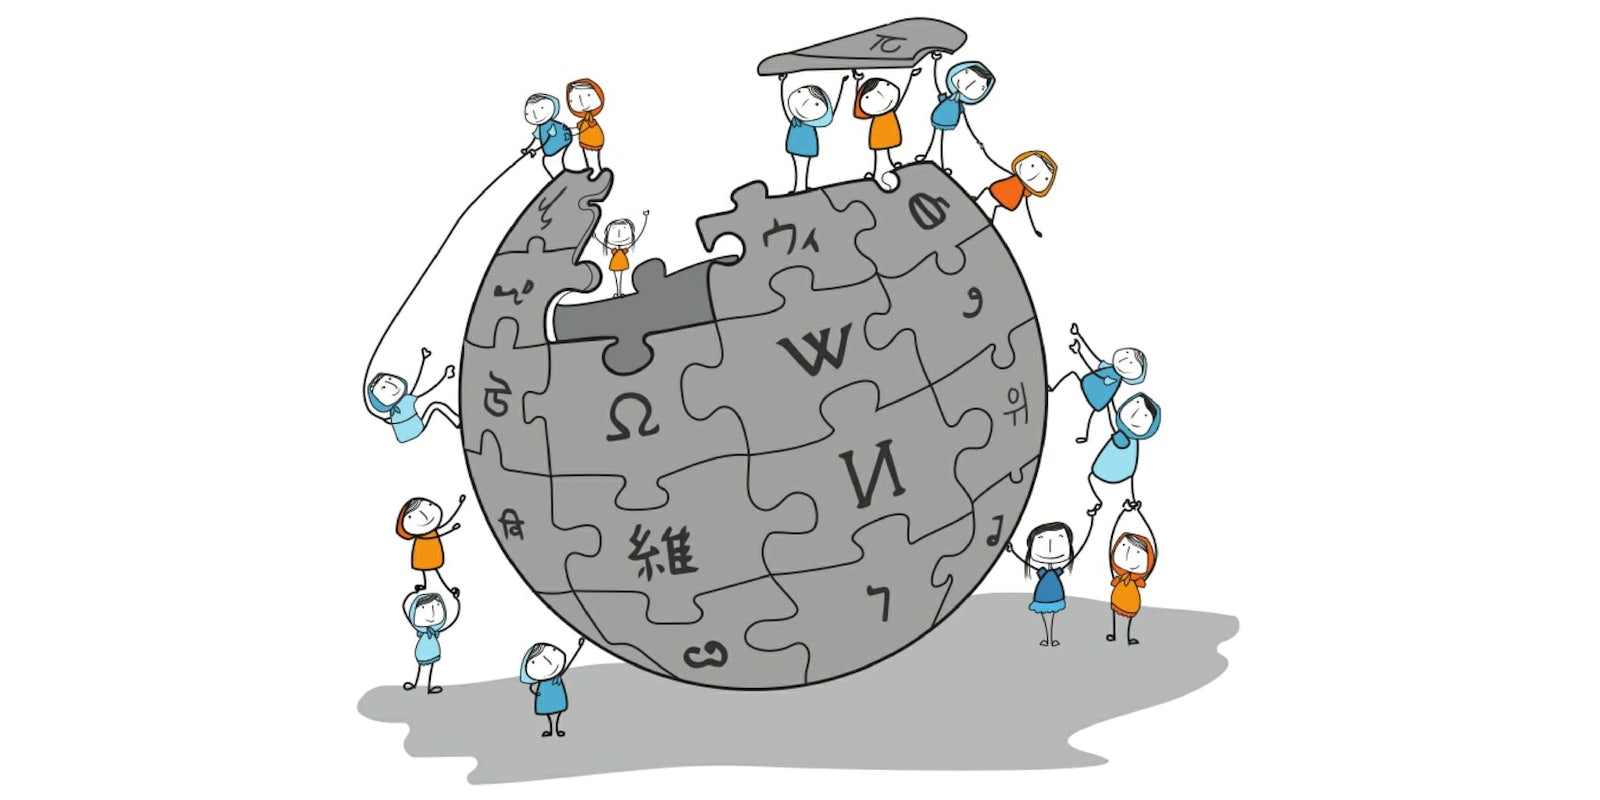 An illustration of women pulling each other up on top of the Wikipedia logo to help fill the spaces where they're not represented for wikipedia's #Wiki4Women campaign.